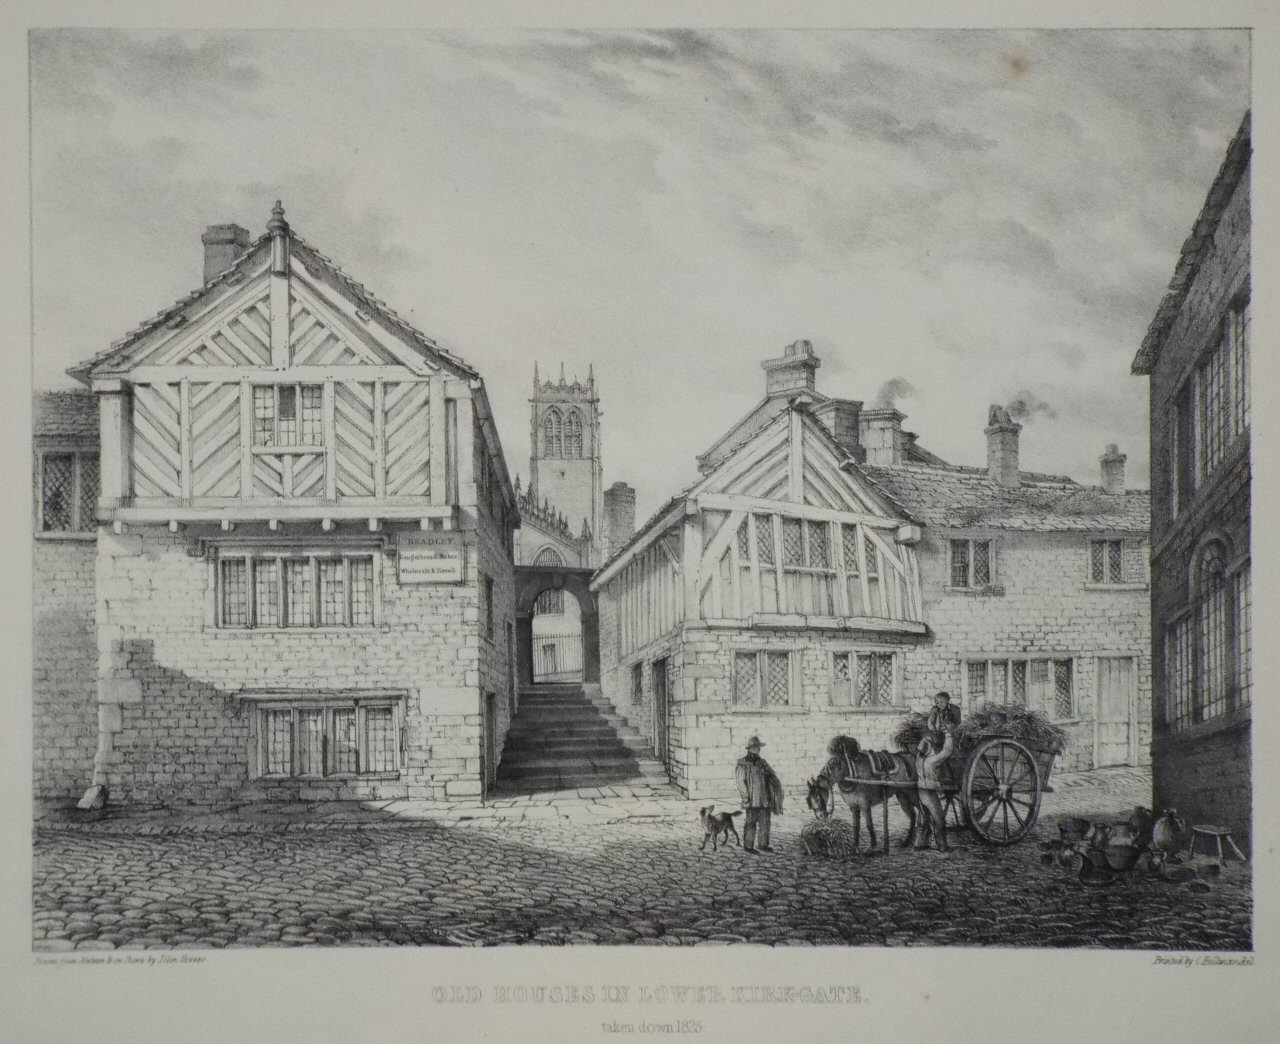 Lithograph - Old Houses in Lower Kirk-gate. taken down 1825. - Horner